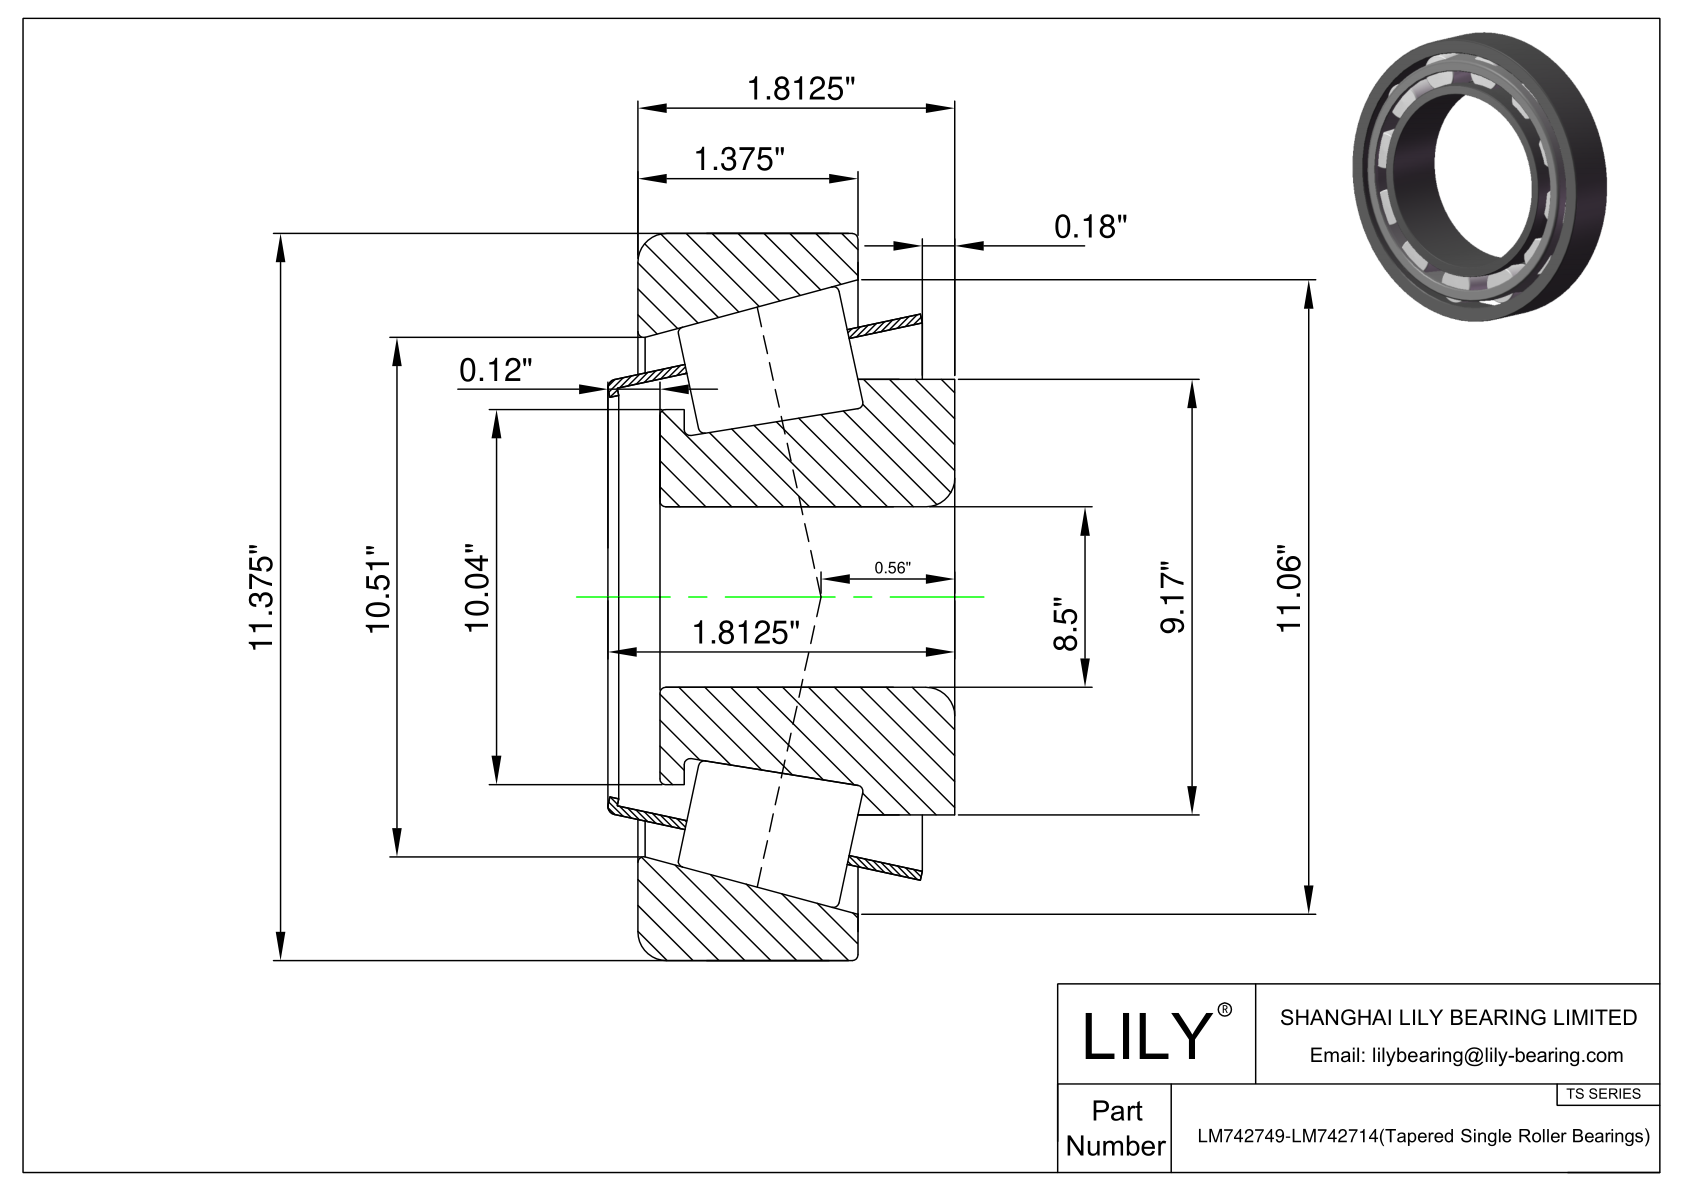 LM742749-LM742714 TS (Tapered Single Roller Bearings) (Imperial) cad drawing